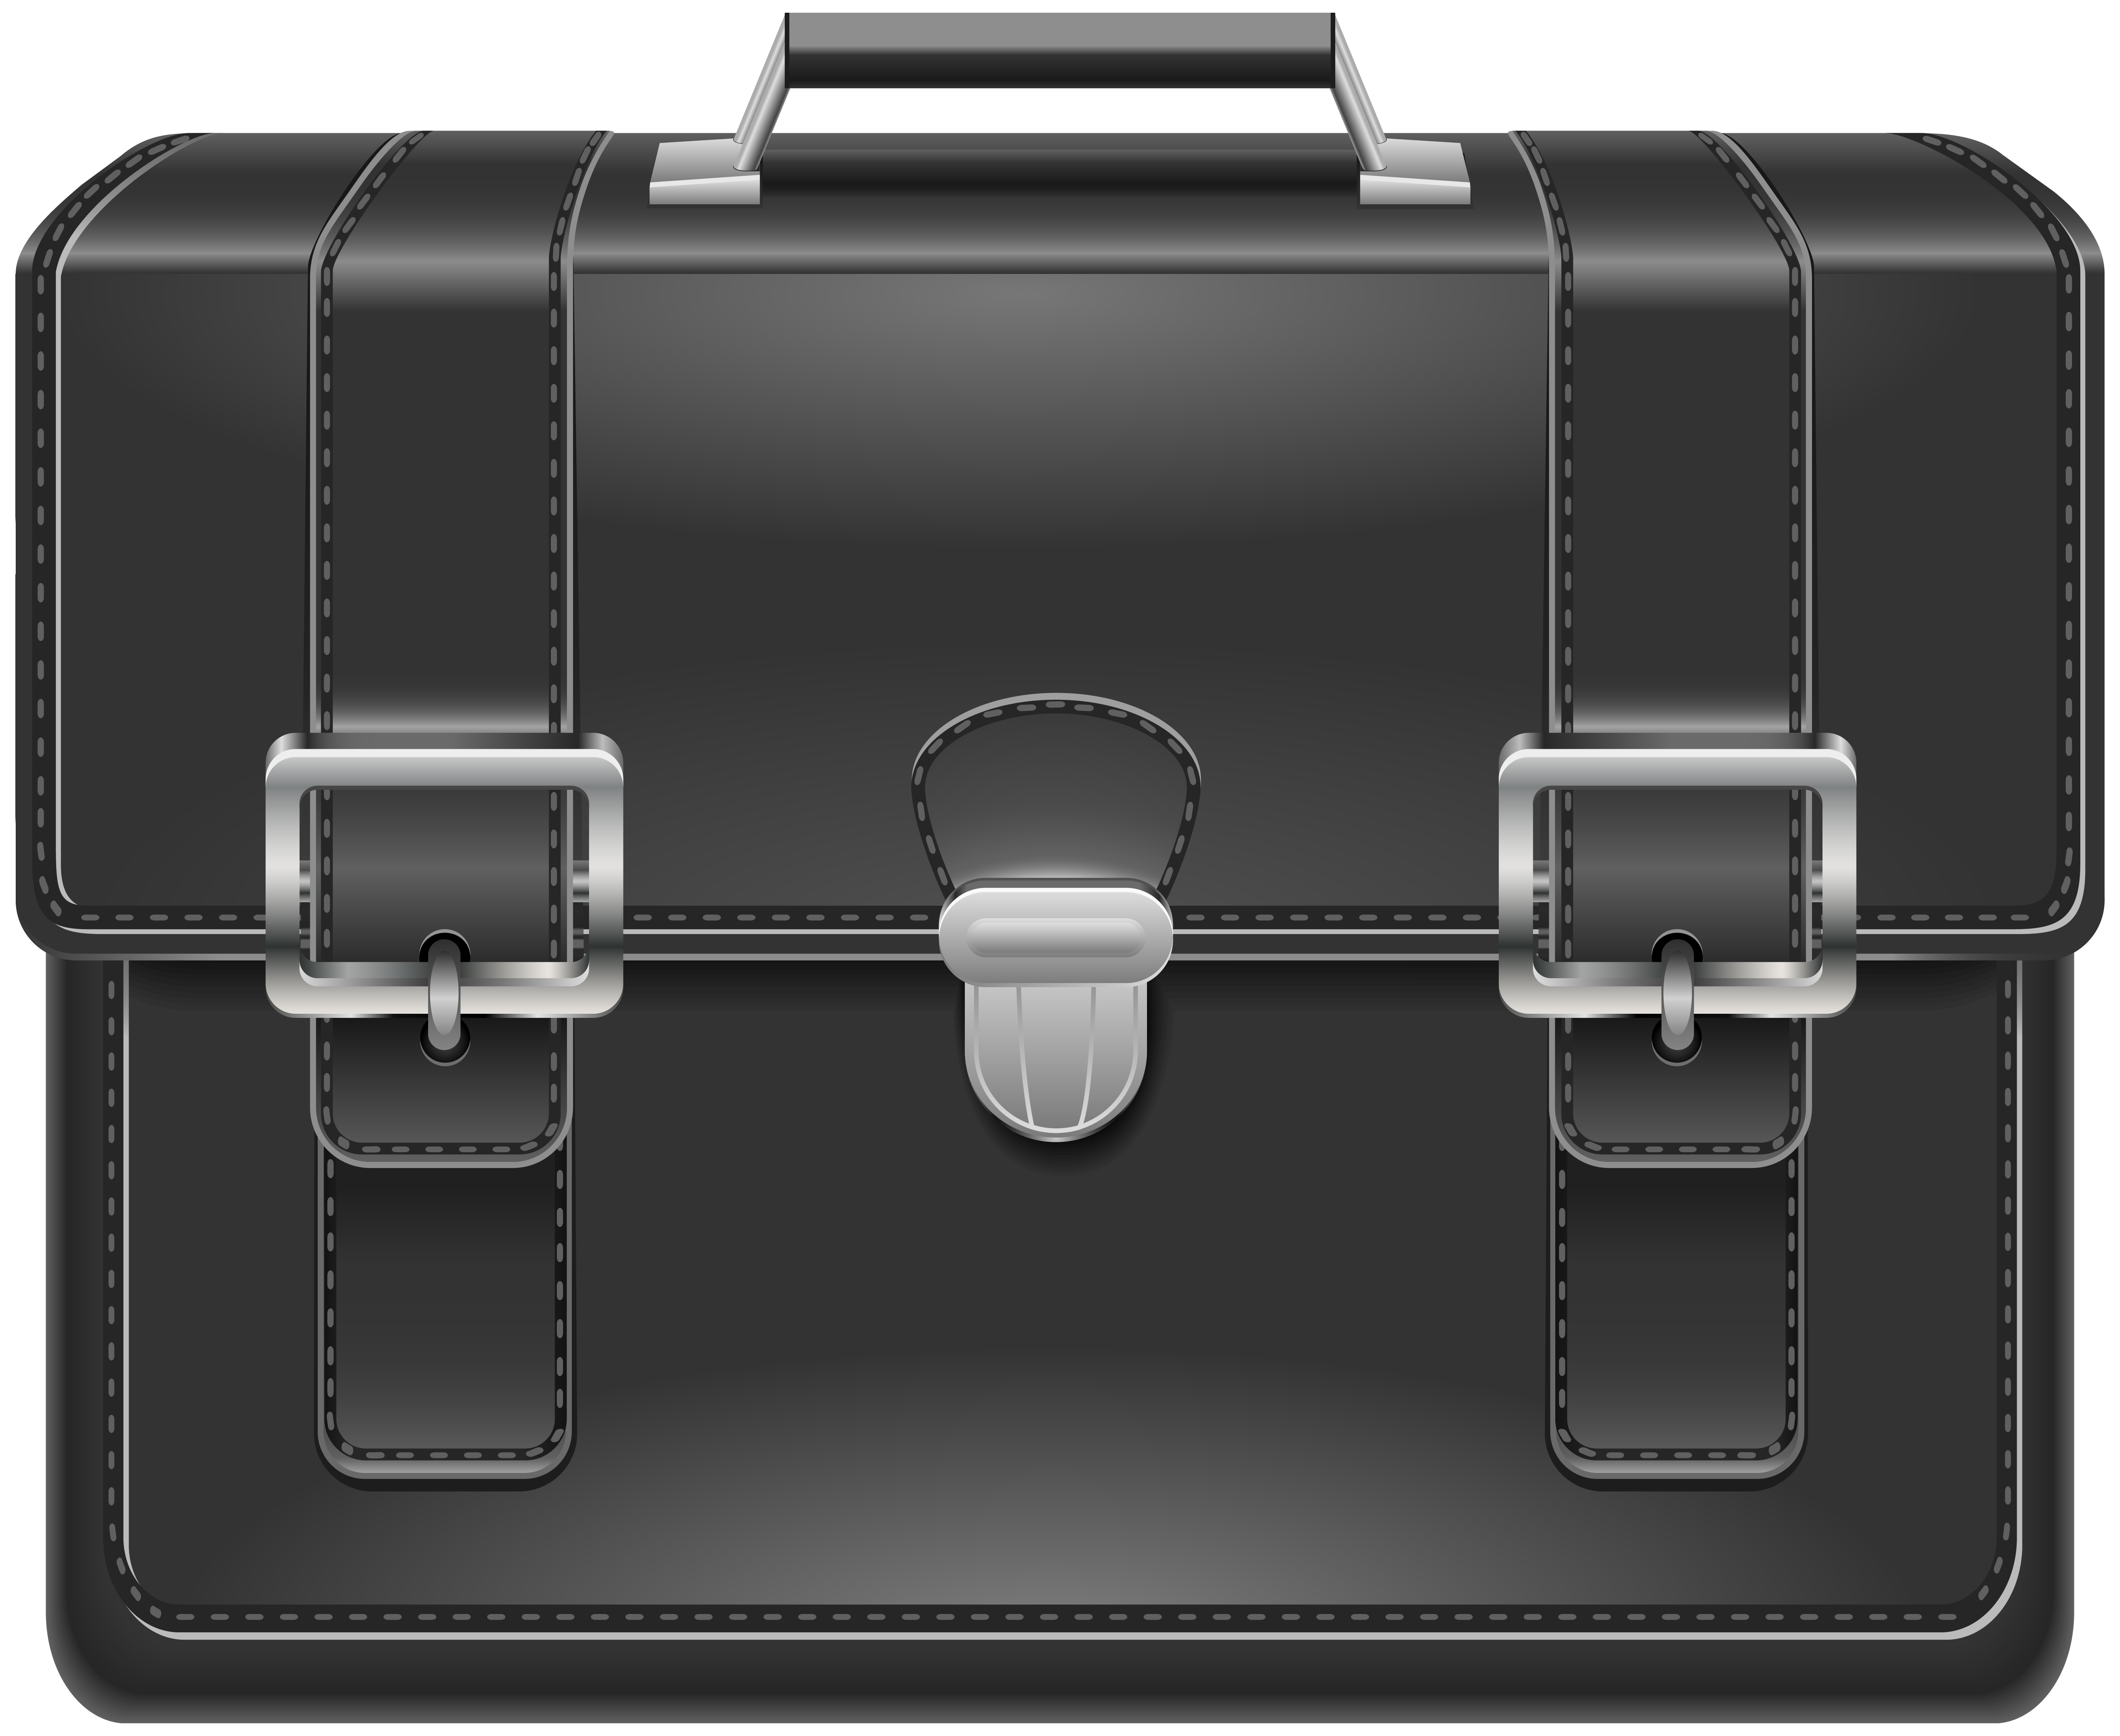 Luggage clipart brown suitcase. Black bag png clip